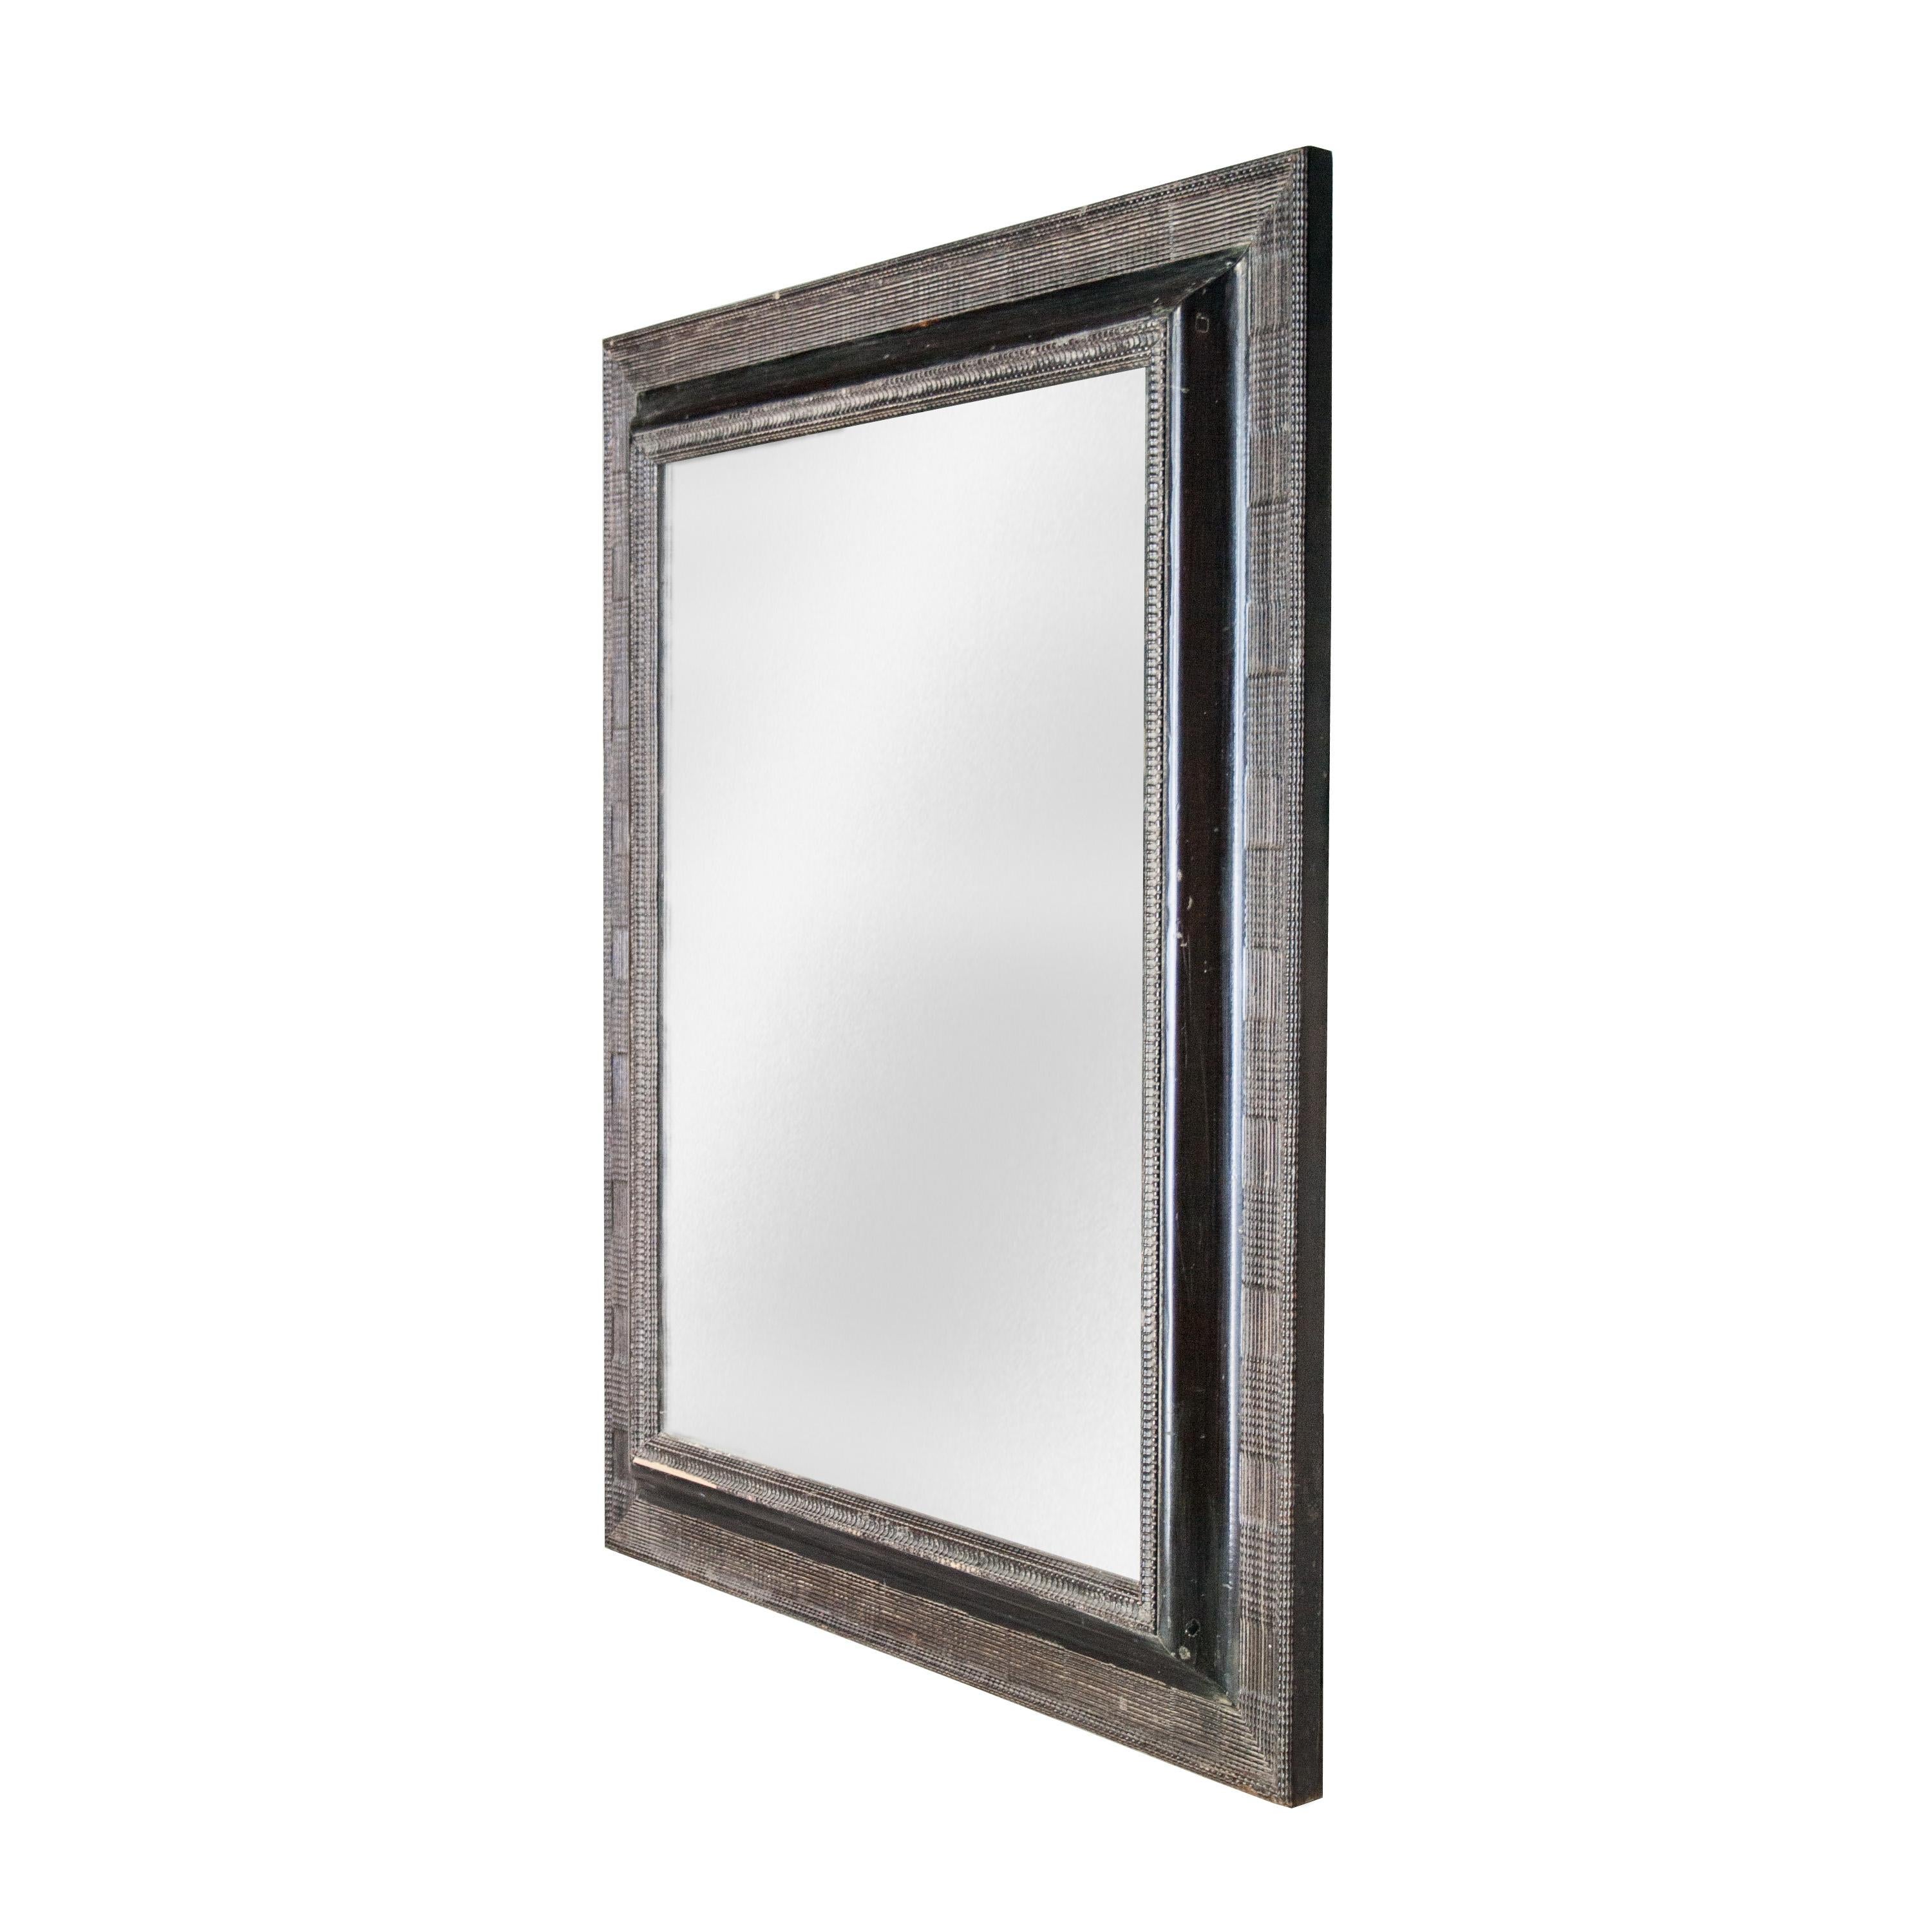 Neoclassical Regency solid hard-carved wooden mirror.
 